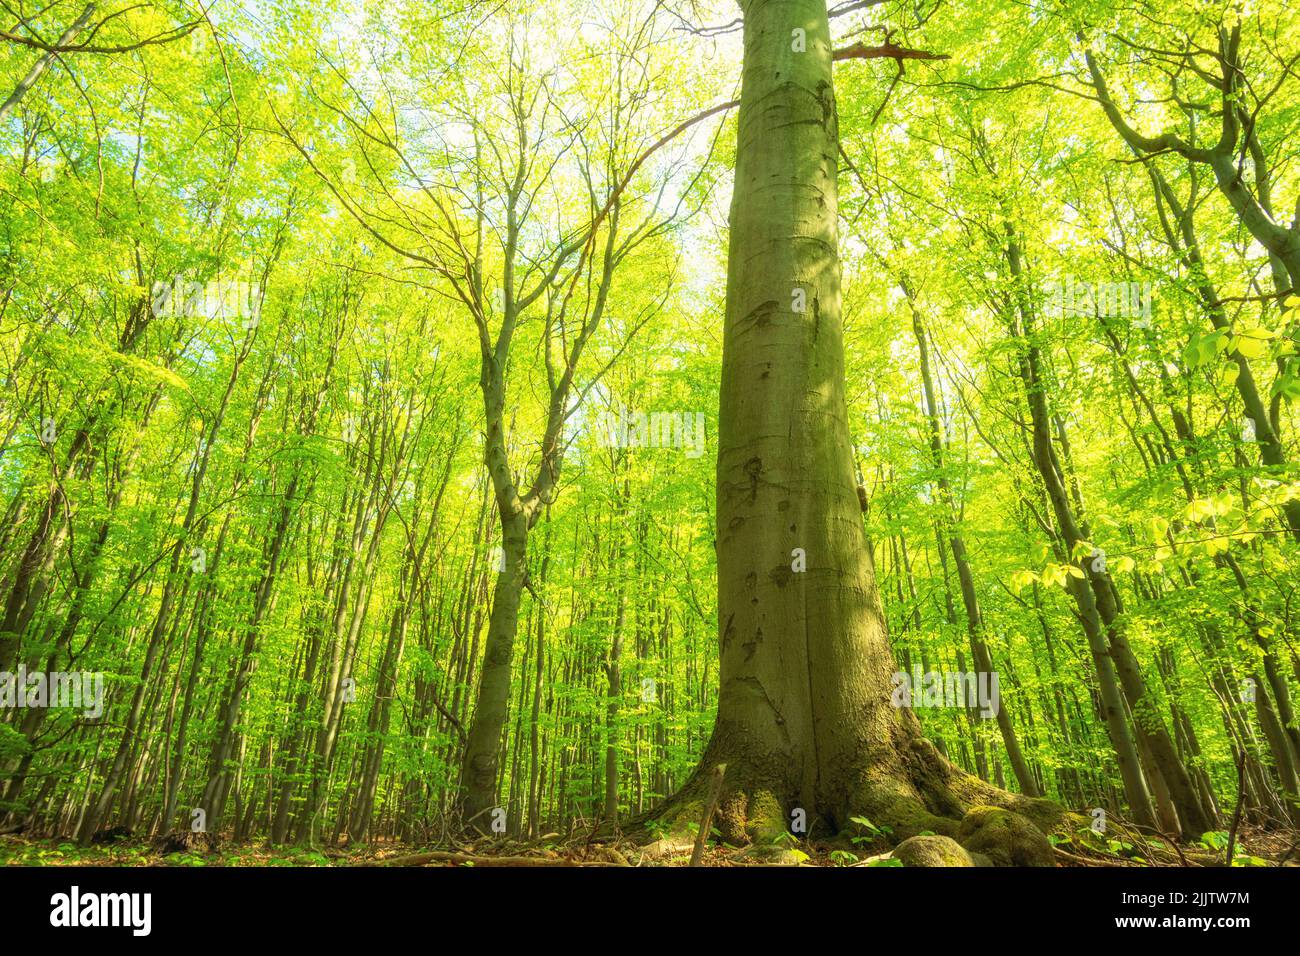 Green fresh mixed forest in spring Stock Photo